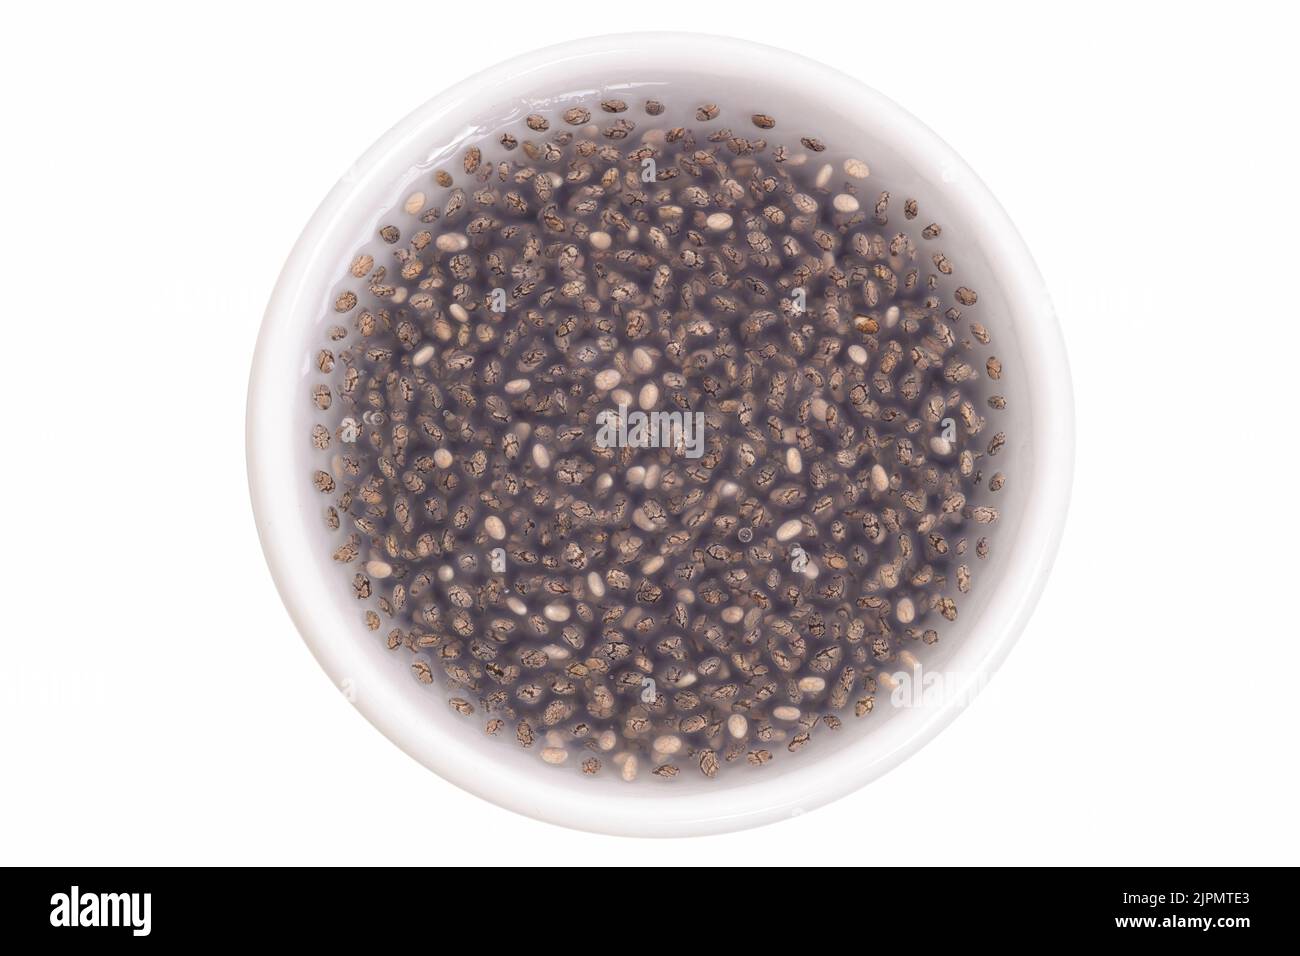 Chia seeds soaked in water in a small white cup isolated on white, top view. Stock Photo